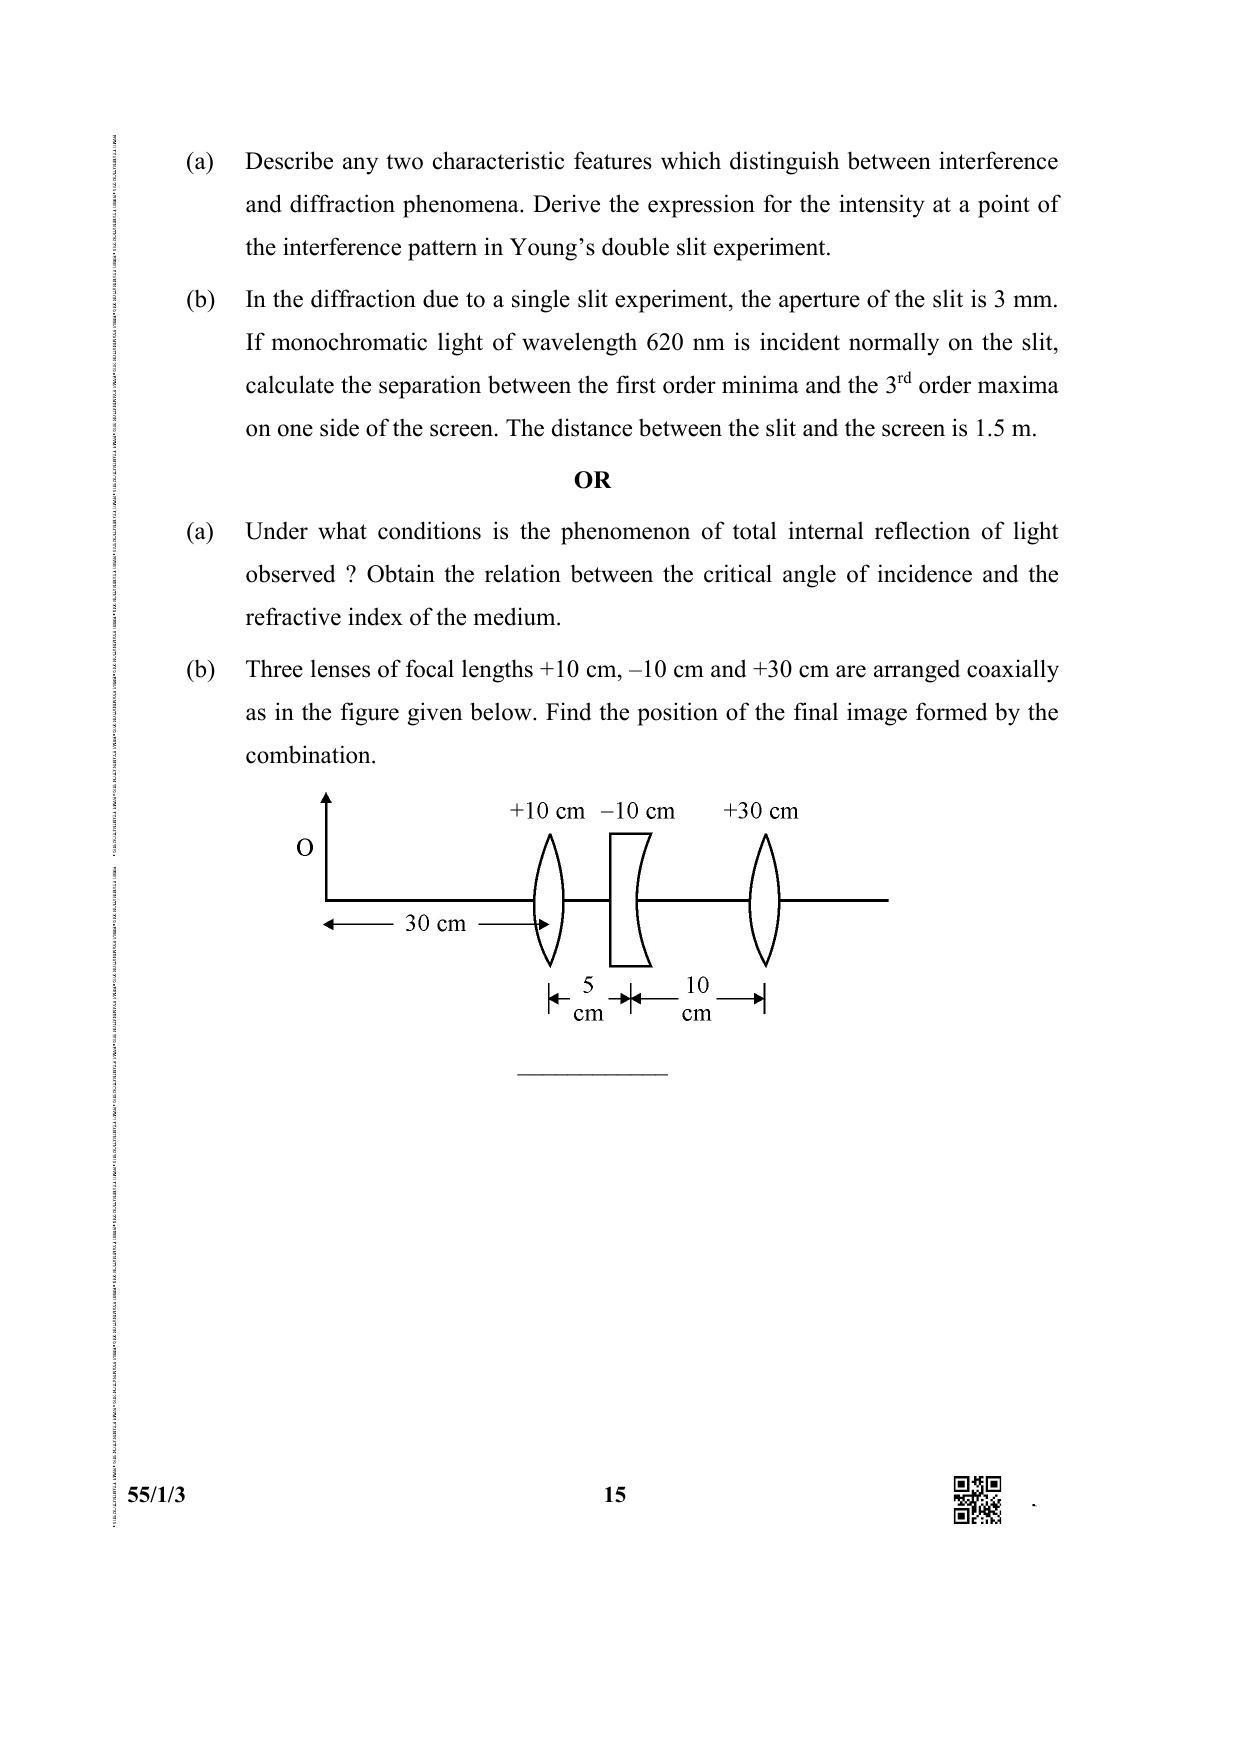 CBSE Class 12 55-1-3 (Physics) 2019 Question Paper - Page 15